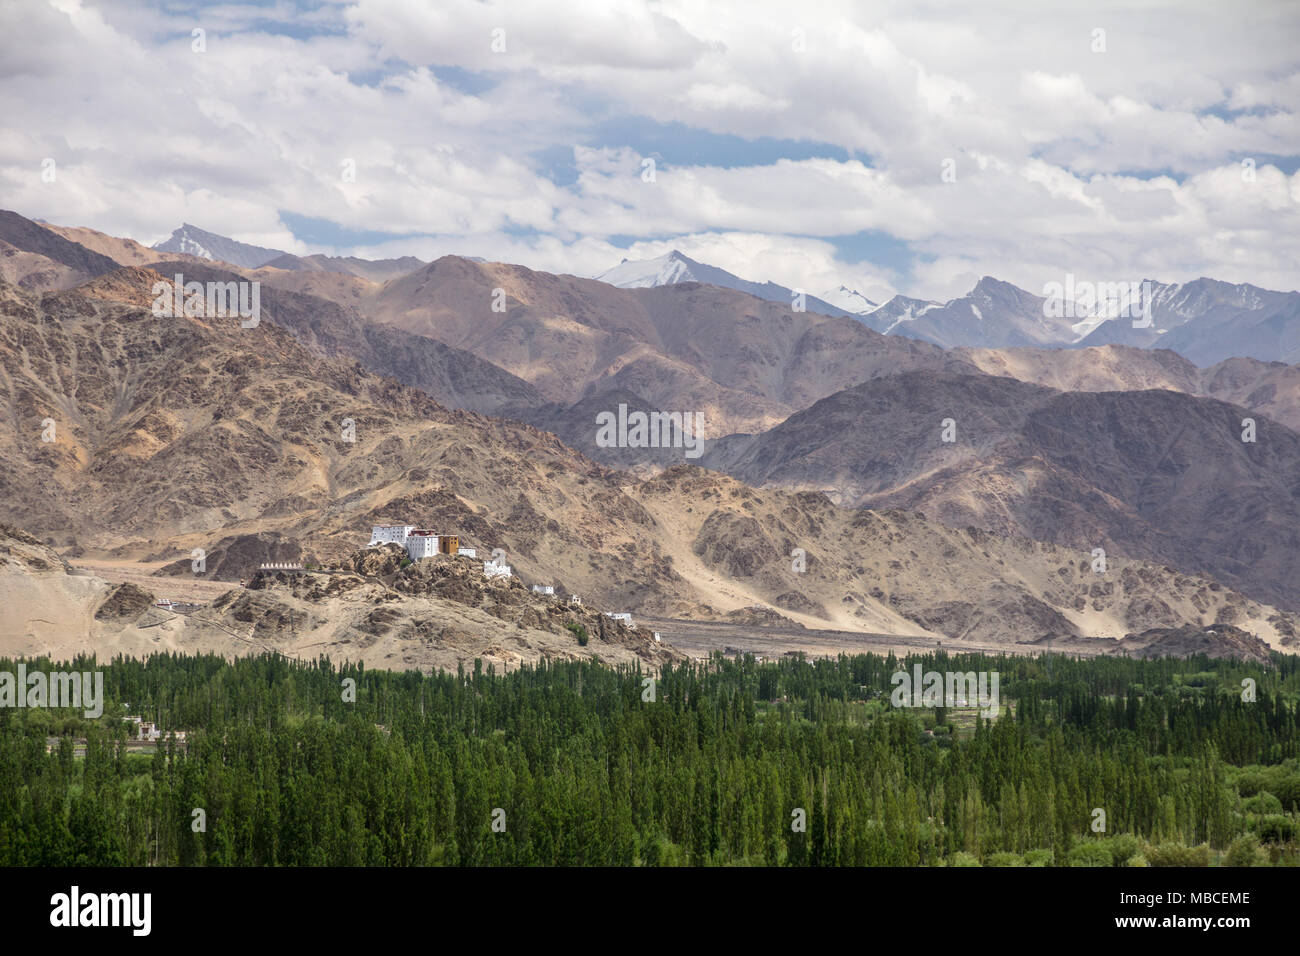 Looking across floodplain of river Indus to Thiksay Monastery.  Perched on a steep rocky outcrop, the monastery is still low compared to mountains Stock Photo